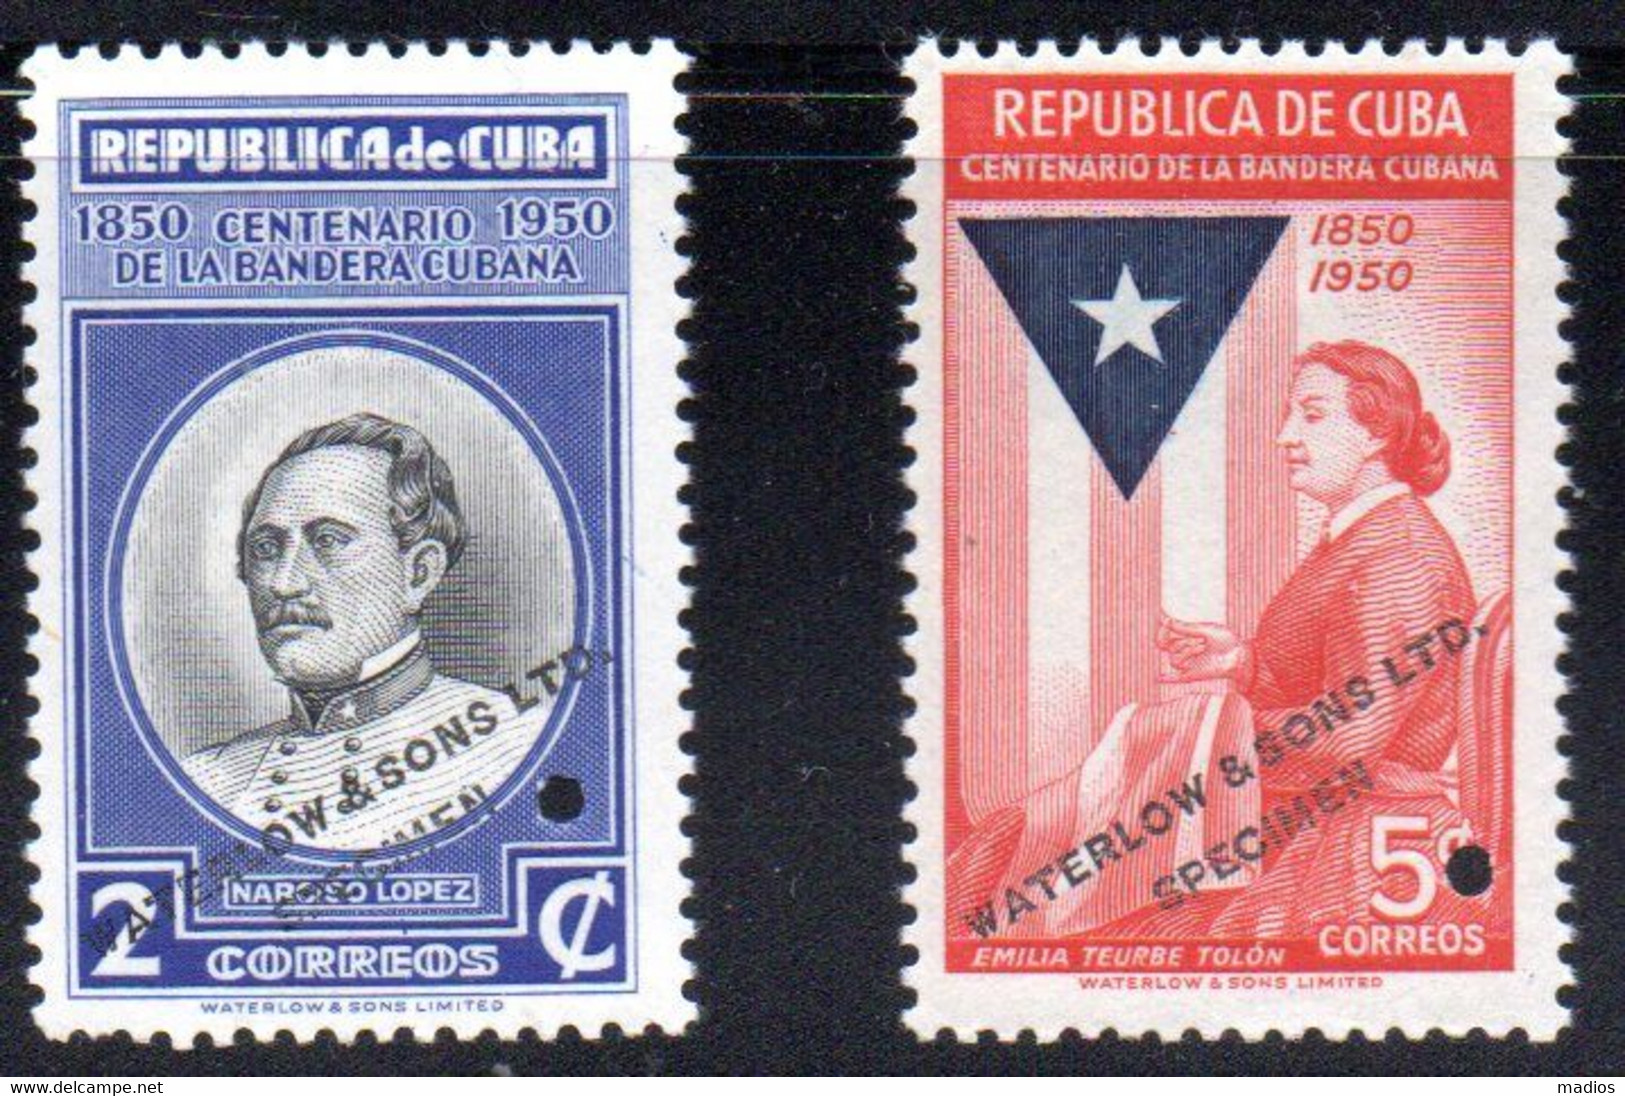 39607A CUBA 2c & 5c Flag Centenary Waterlow & Son Color Proofs And Small Hole Punch - Imperforates, Proofs & Errors